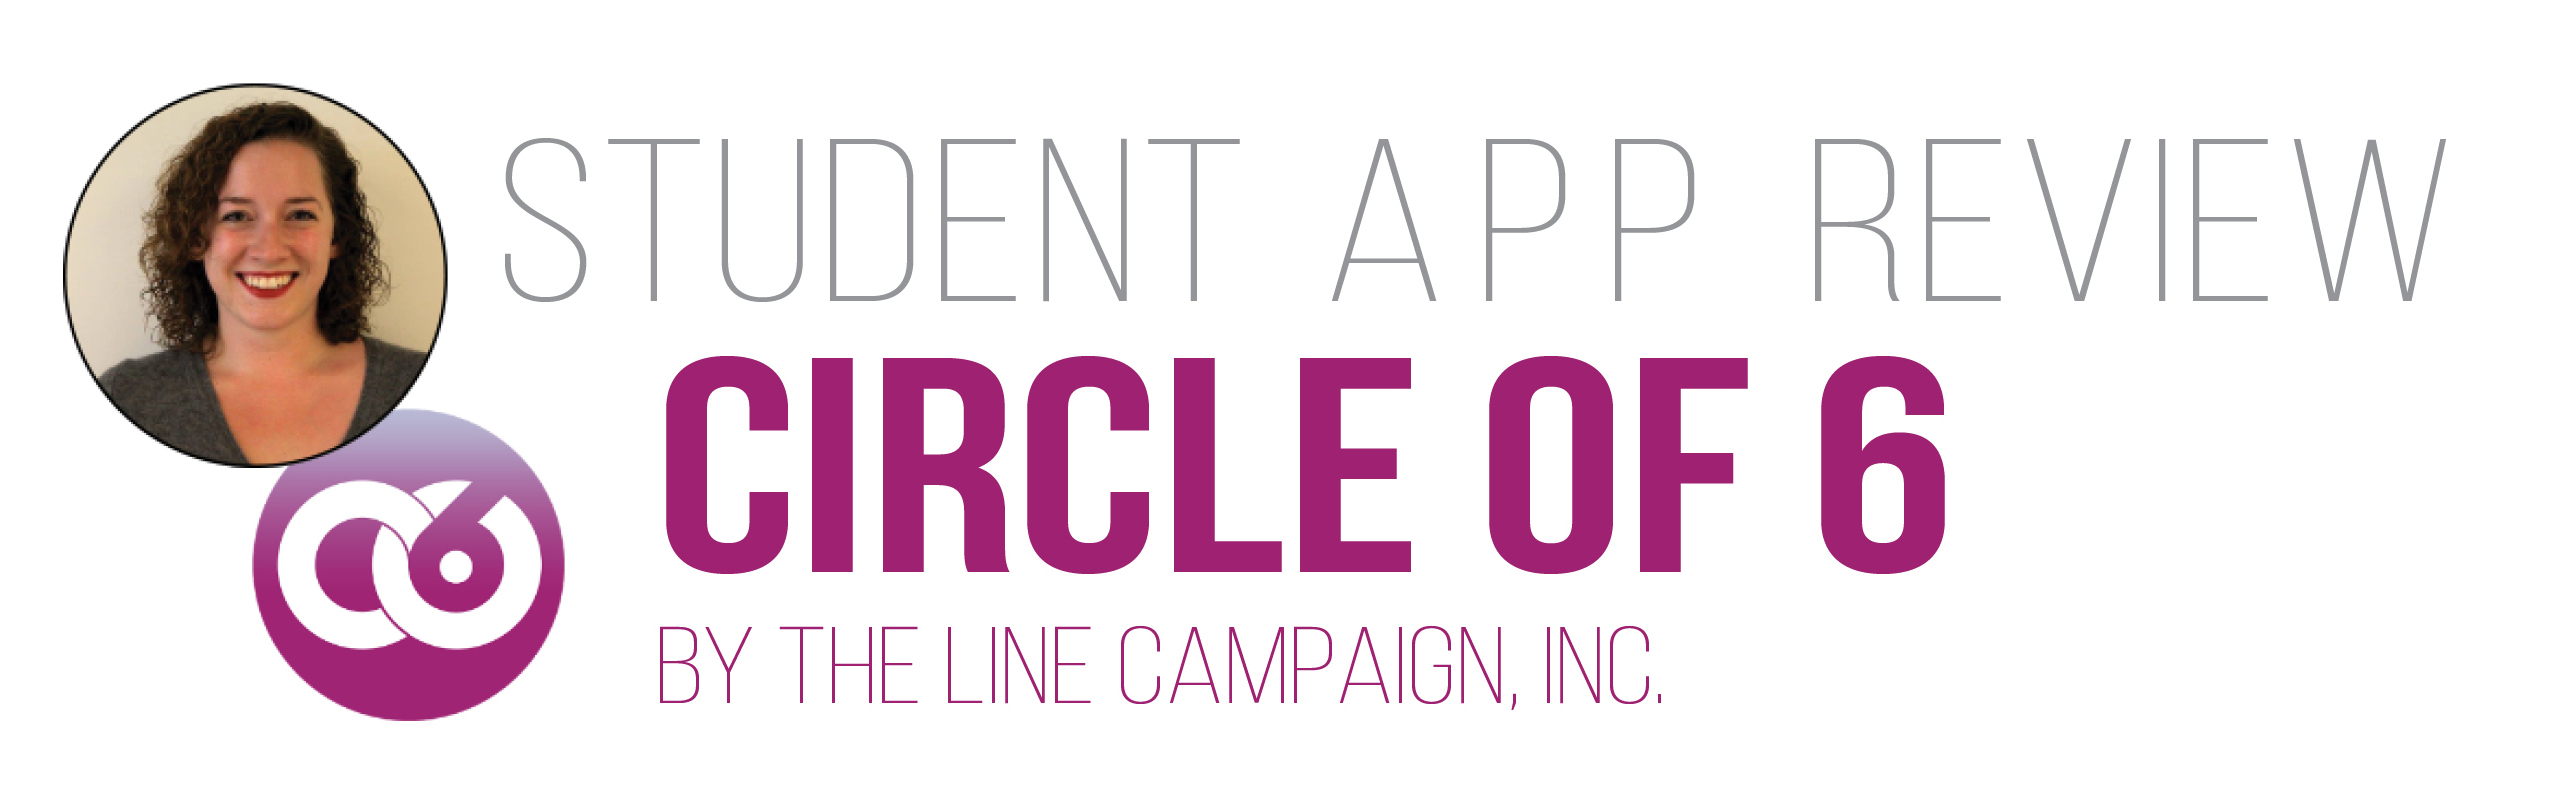 Student app review: Circle of 6